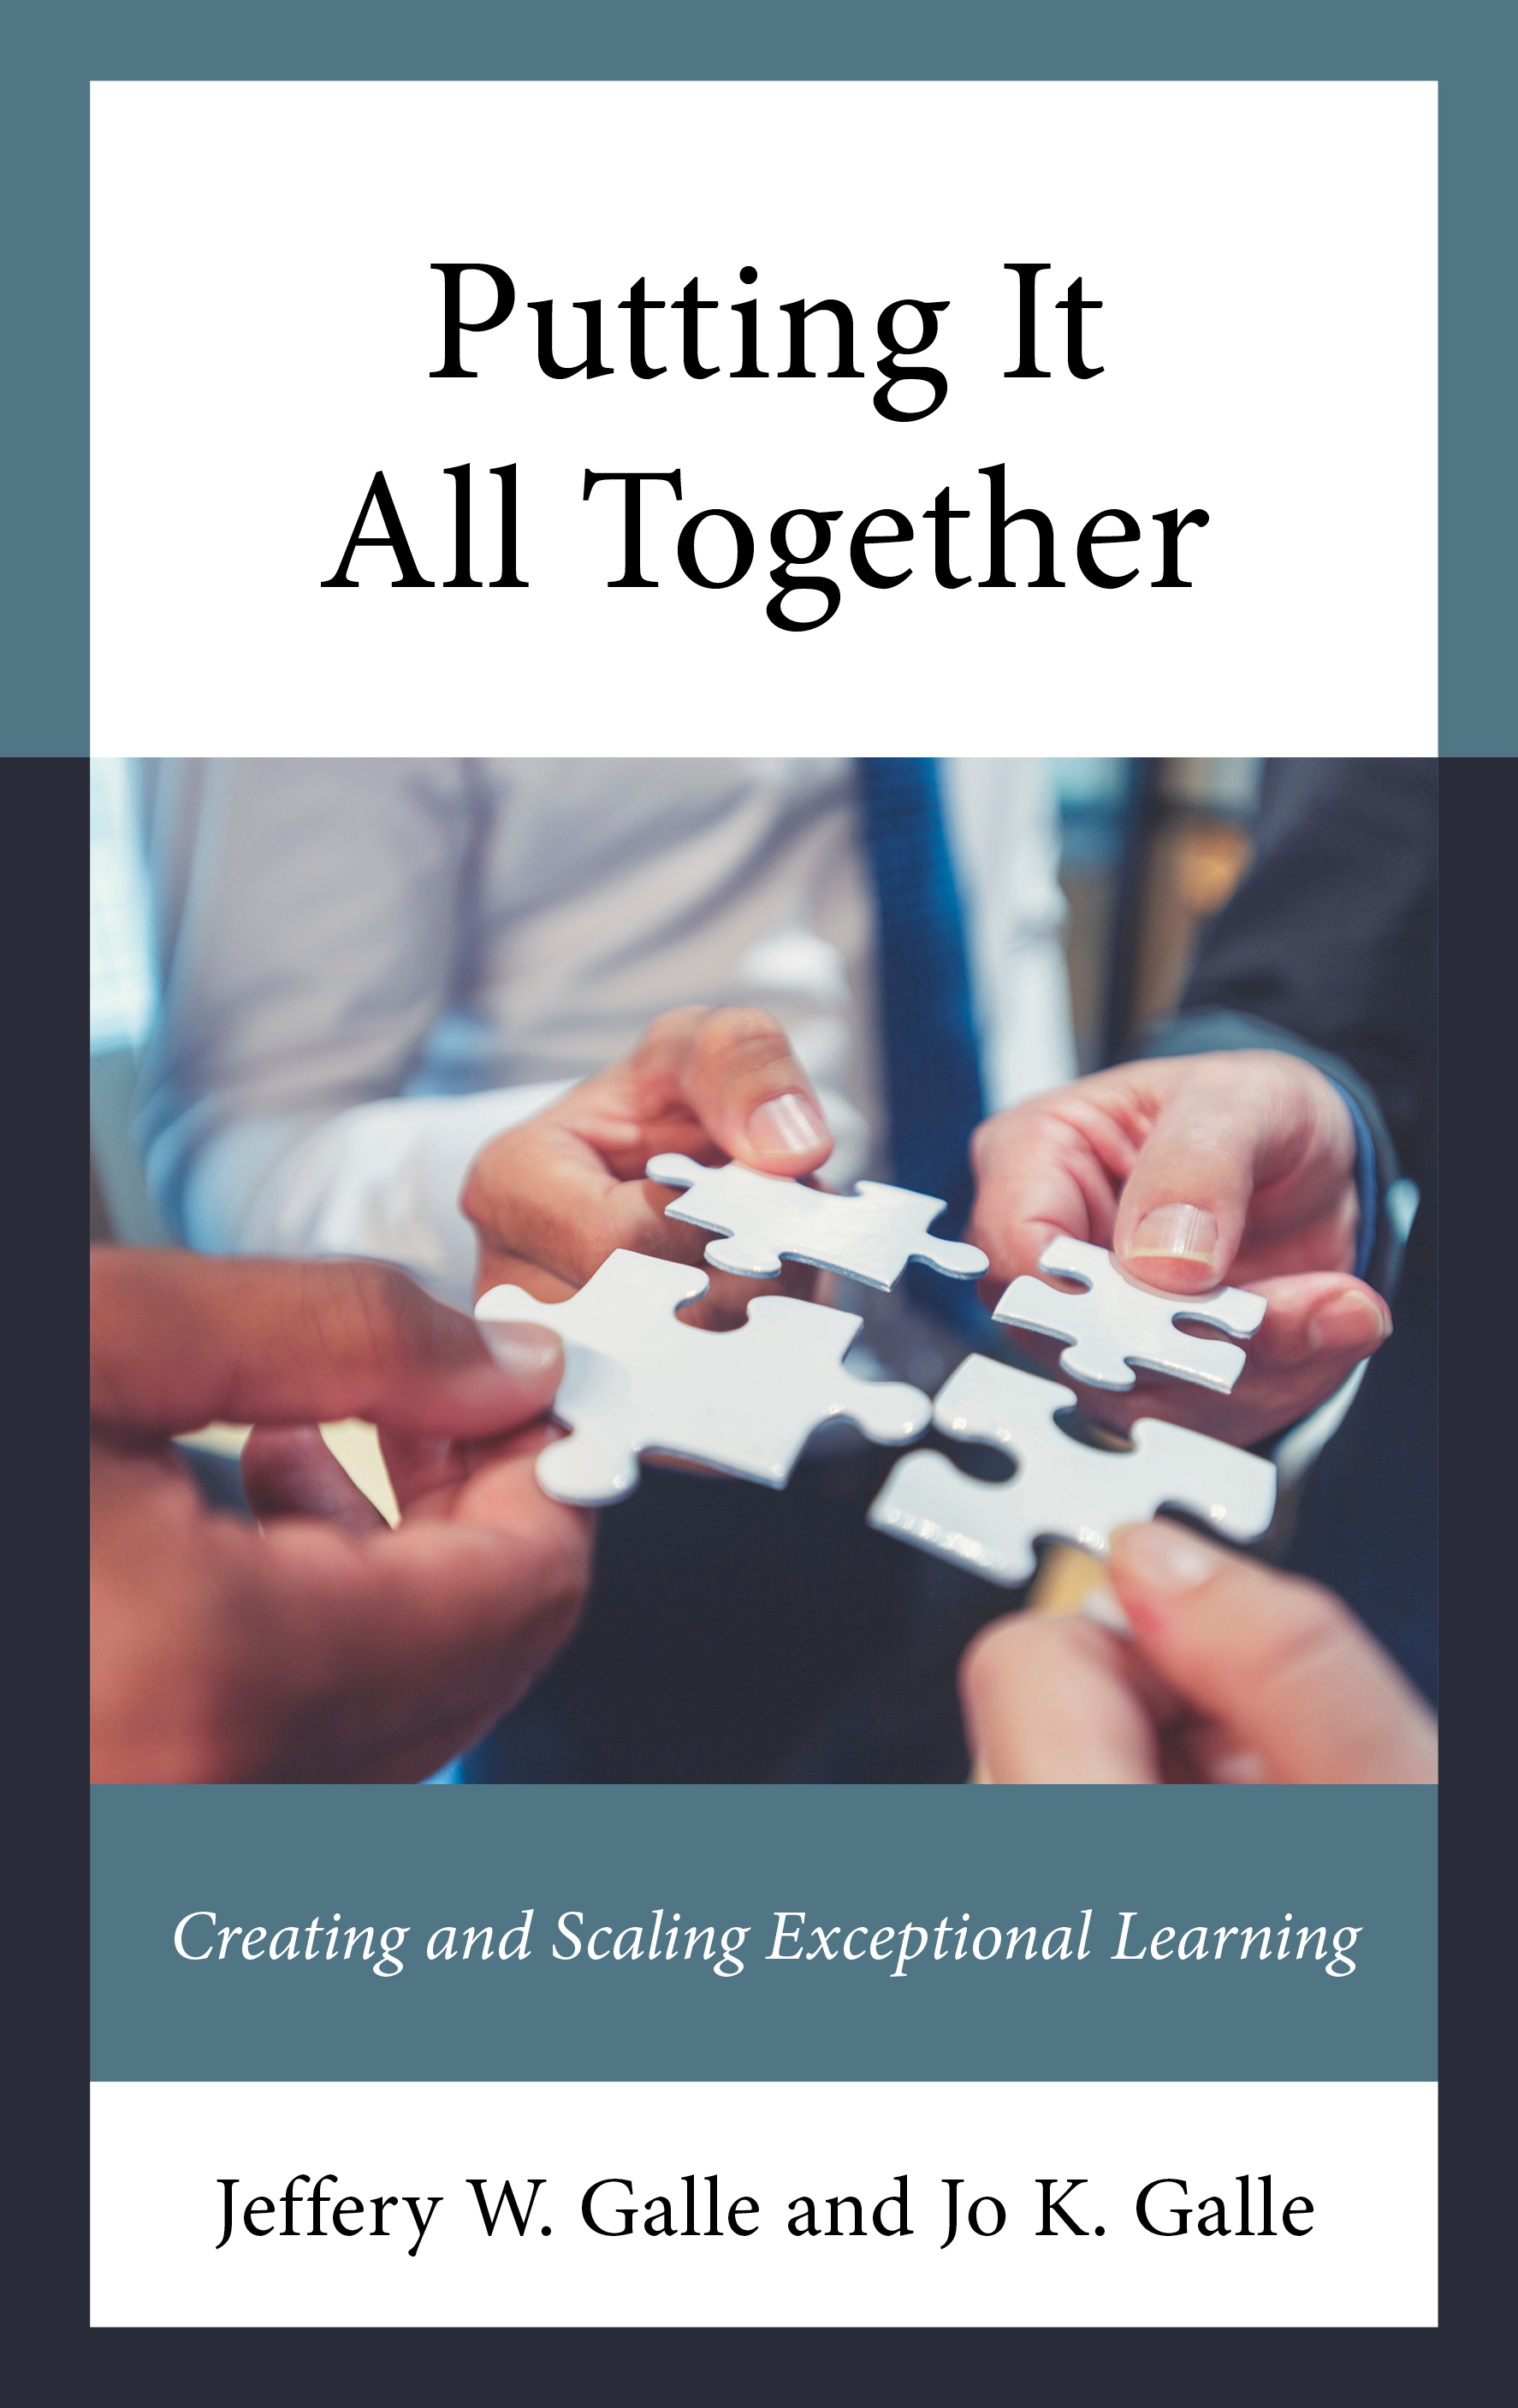 Putting It All Together: Creating and Scaling Exceptional Learning